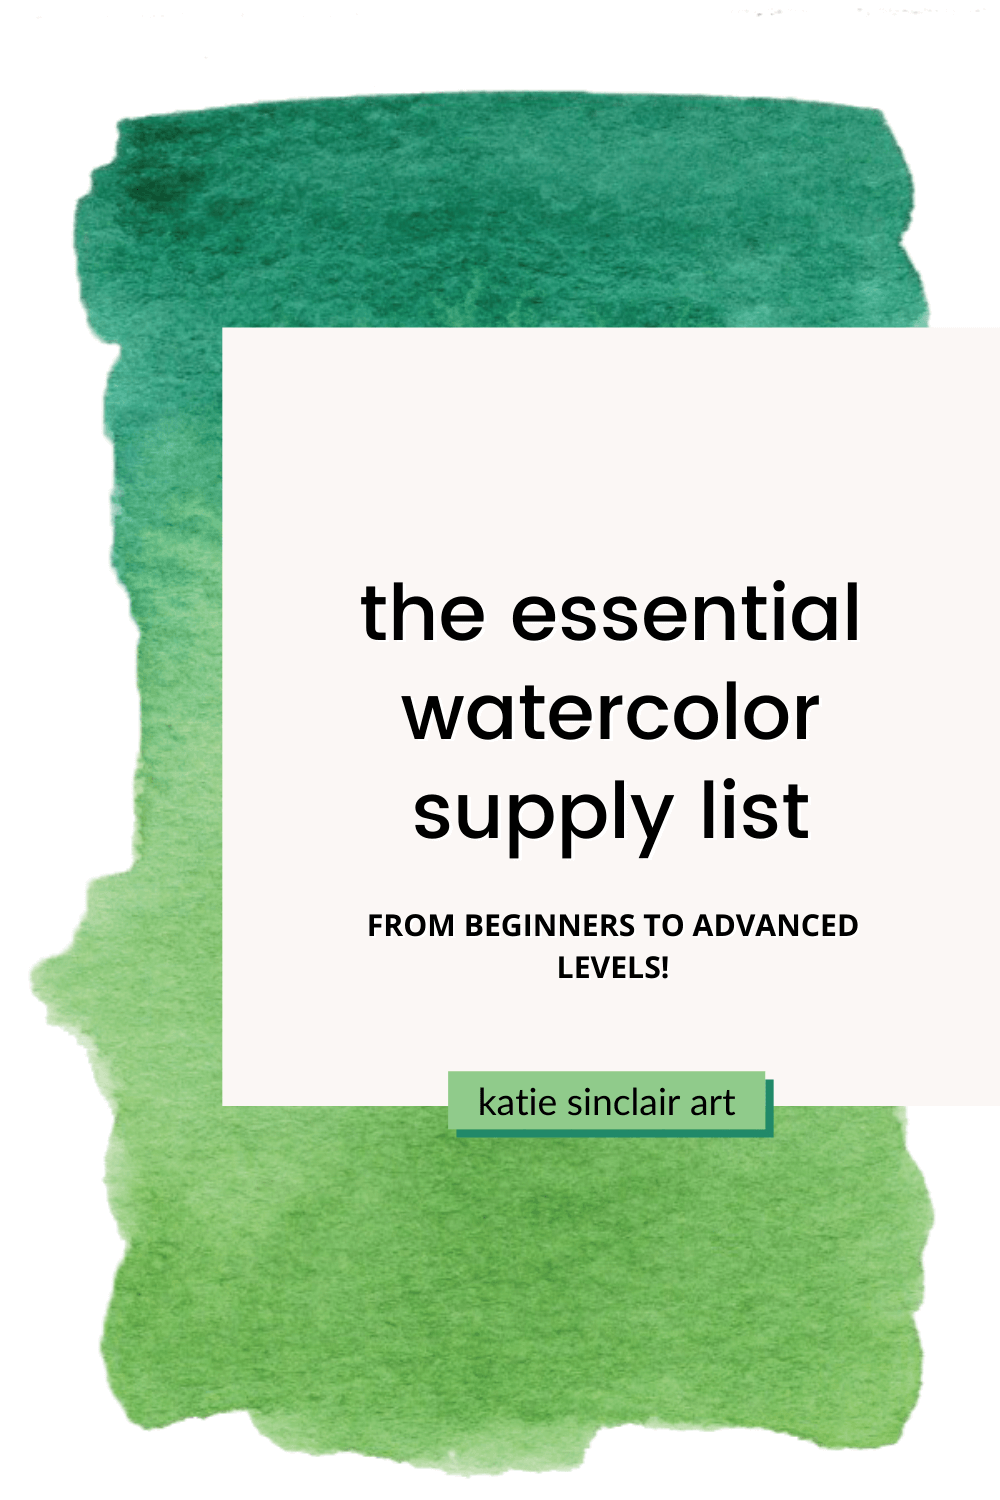 Eleven New Watercolor Brushes for a Beginner or Advanced Watercolor  Painter, Various Brands, in Perfect Condition. 